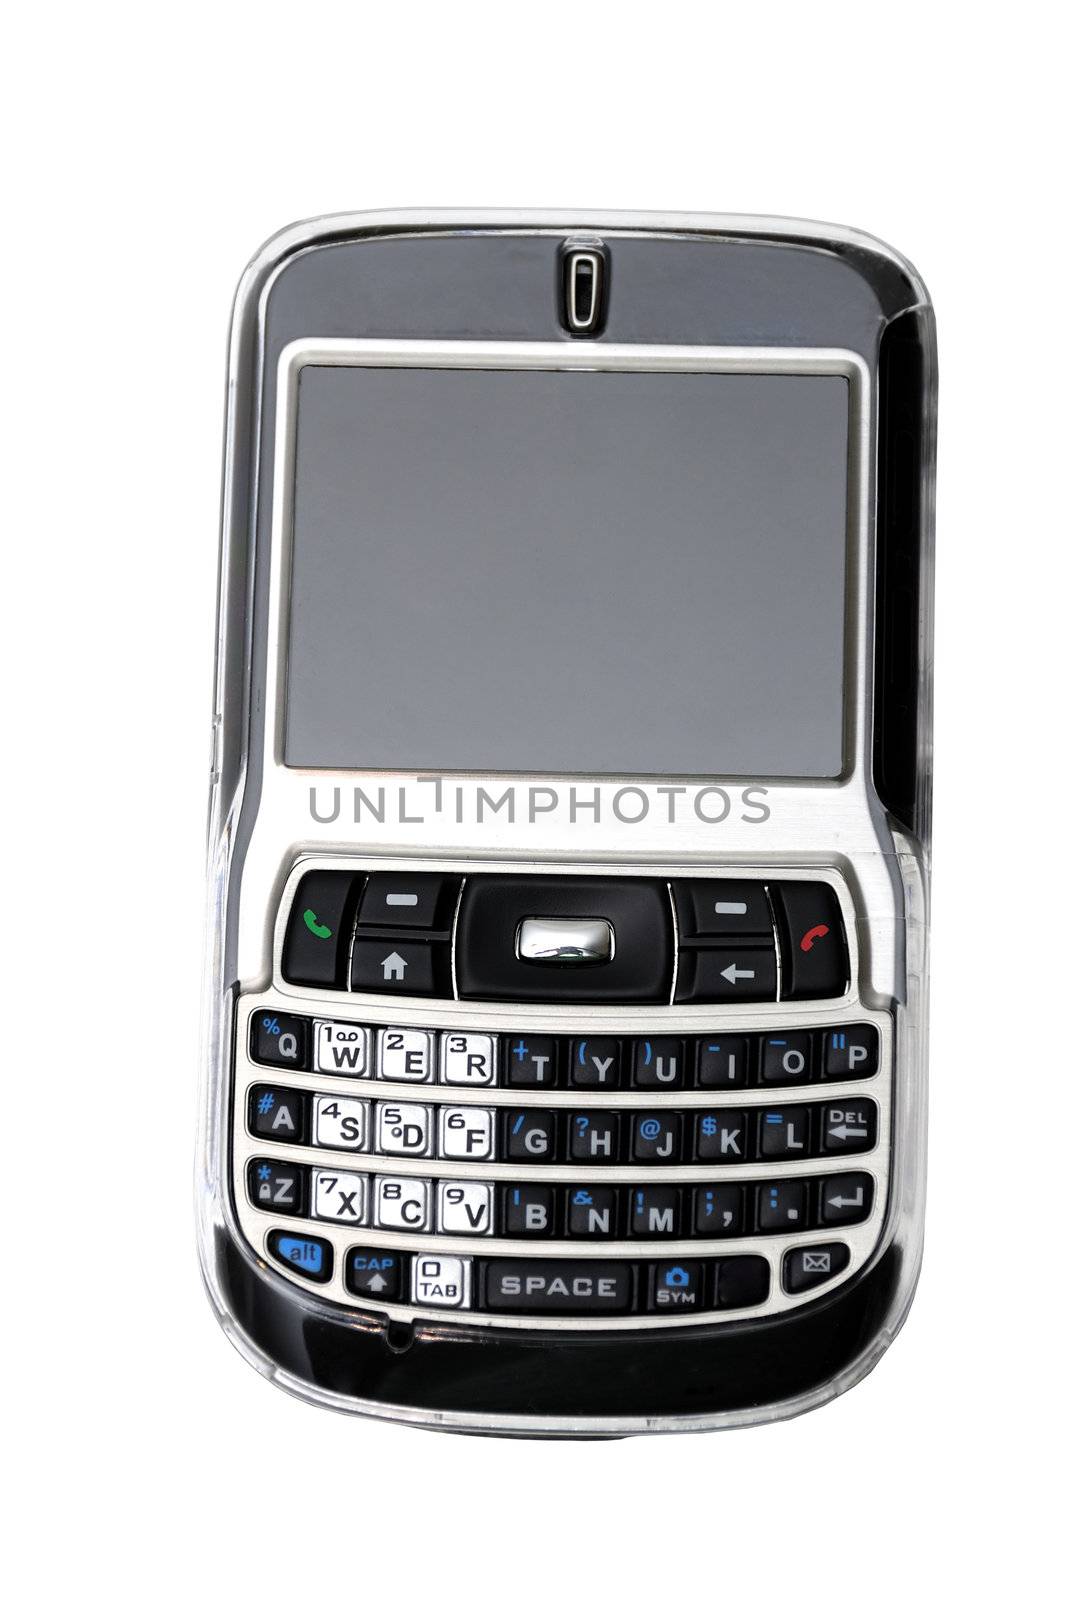 A PDA phone isolated on a white back ground